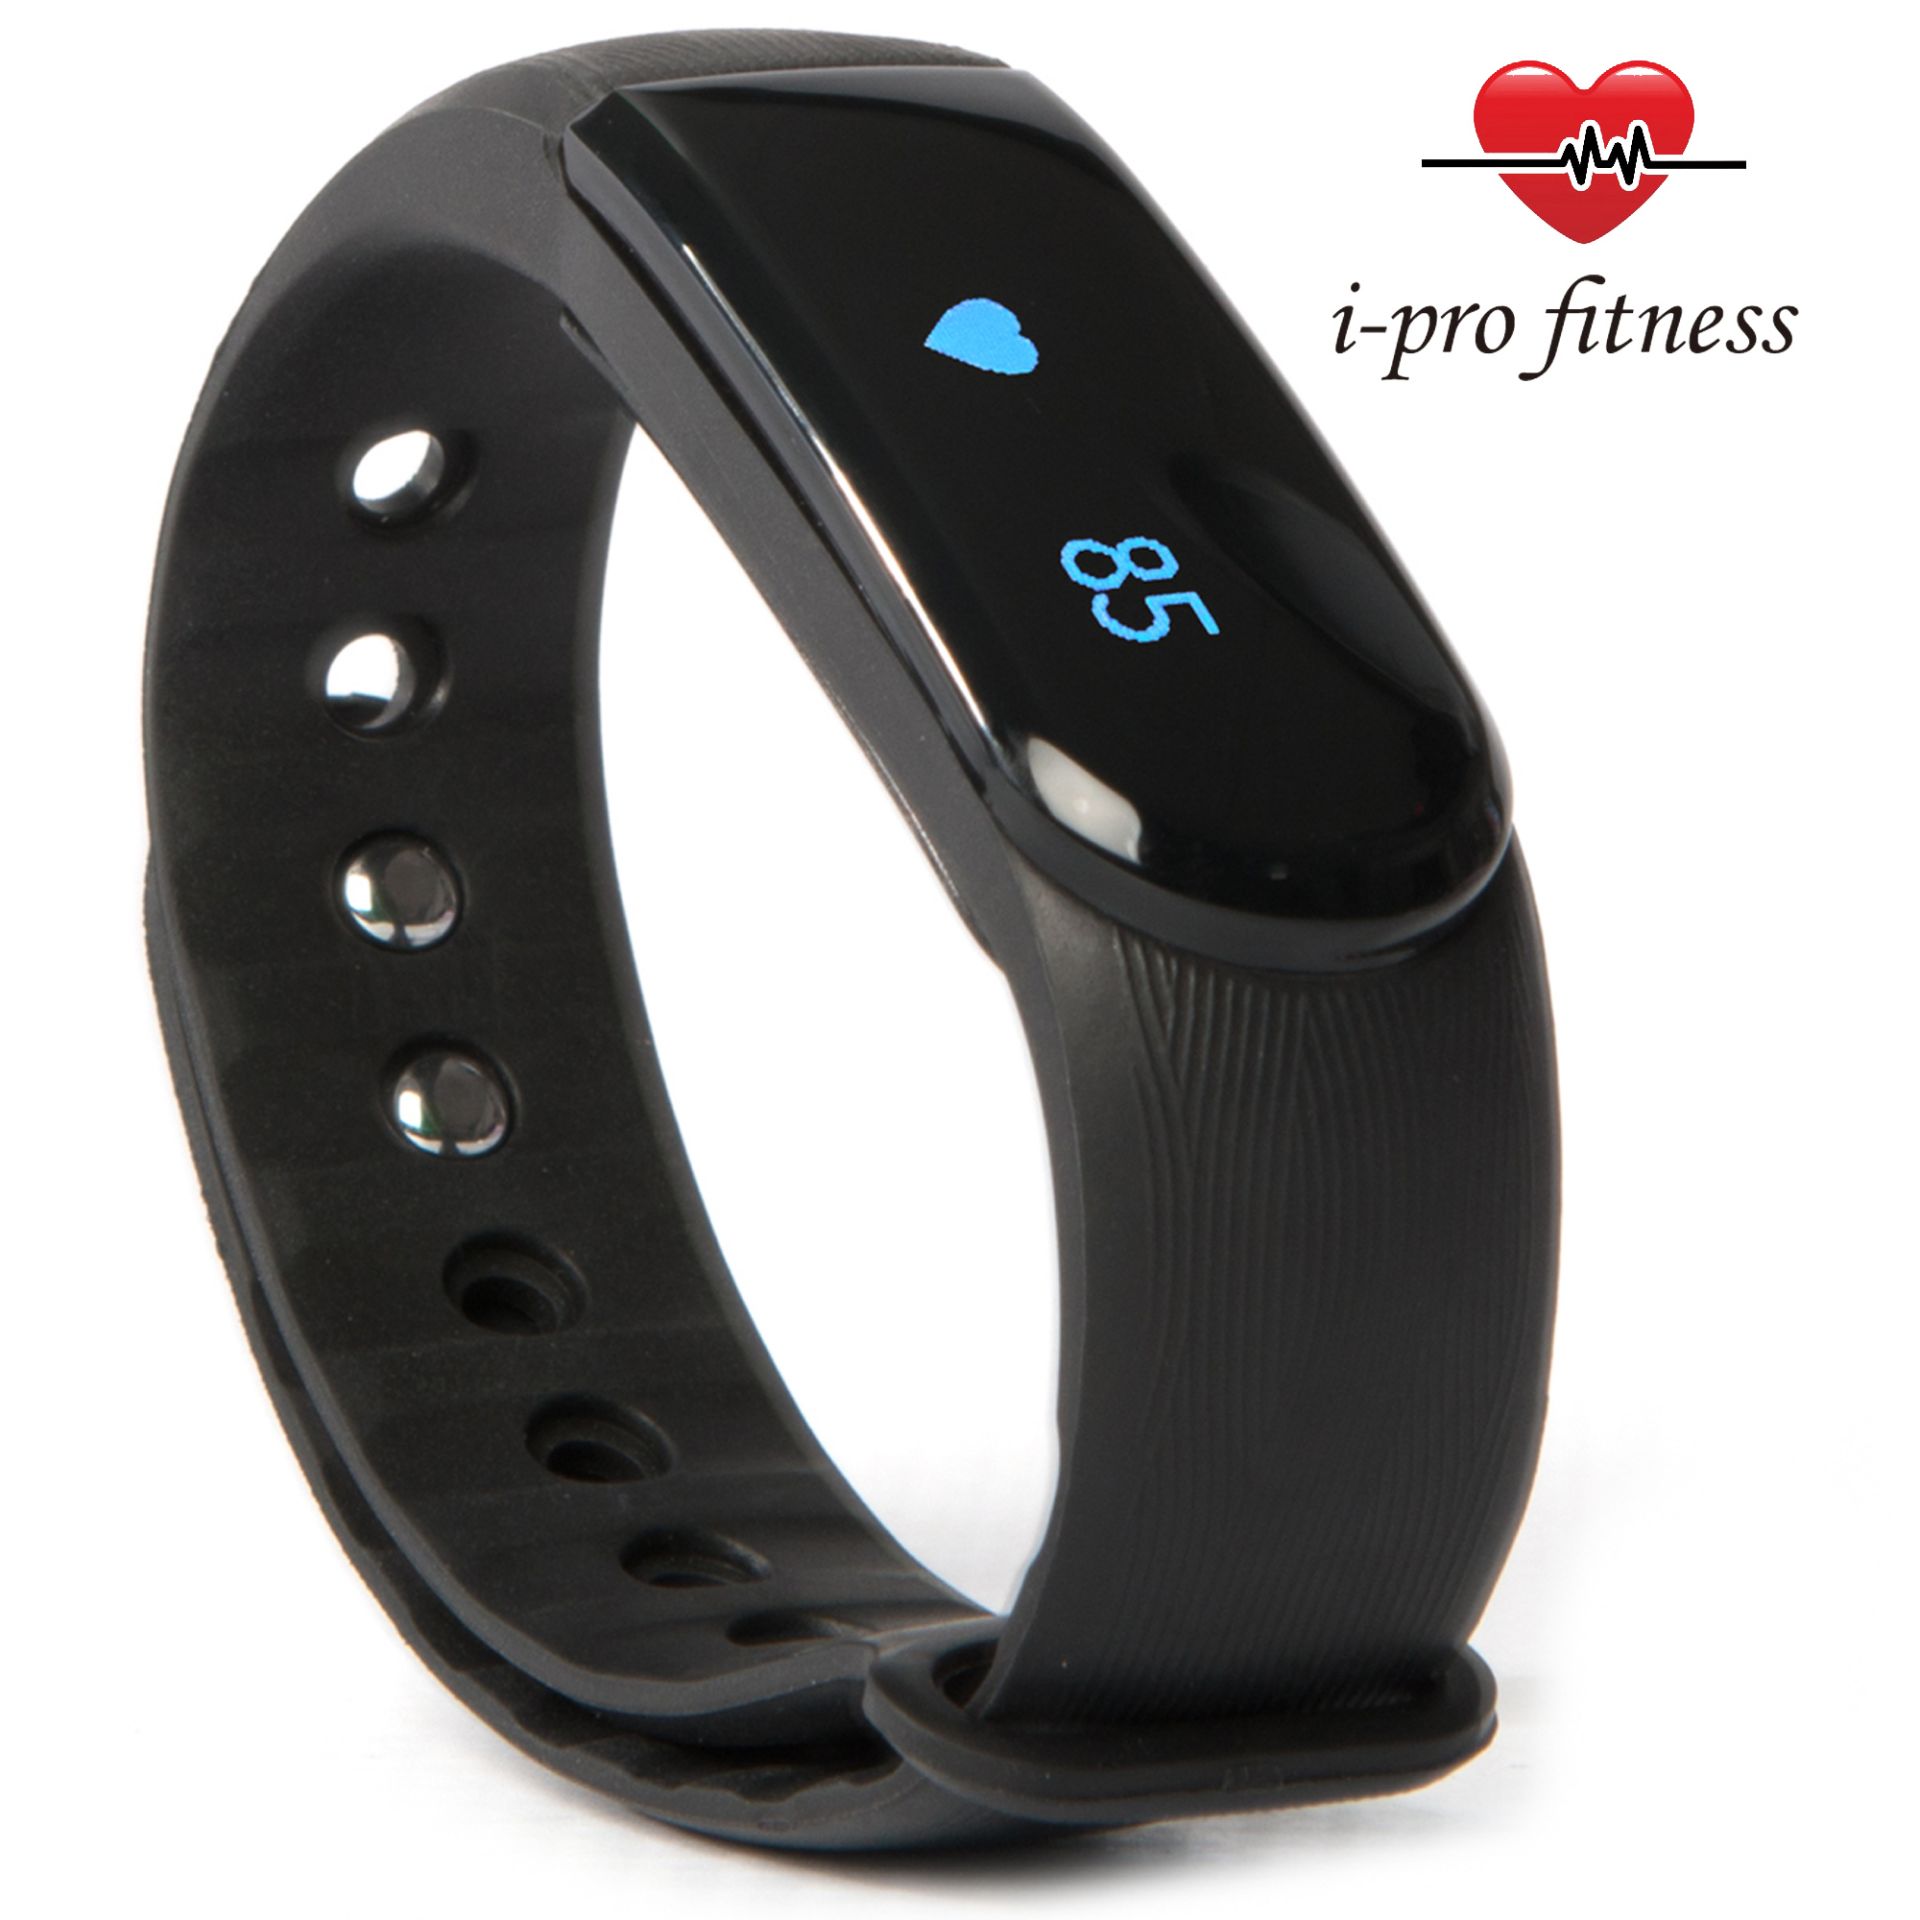 i-Pro ID101 Fitness Tracker Seamless Pairing With VeryFit 2.0 App Bluetooth Exercise Tracker, - Image 5 of 5